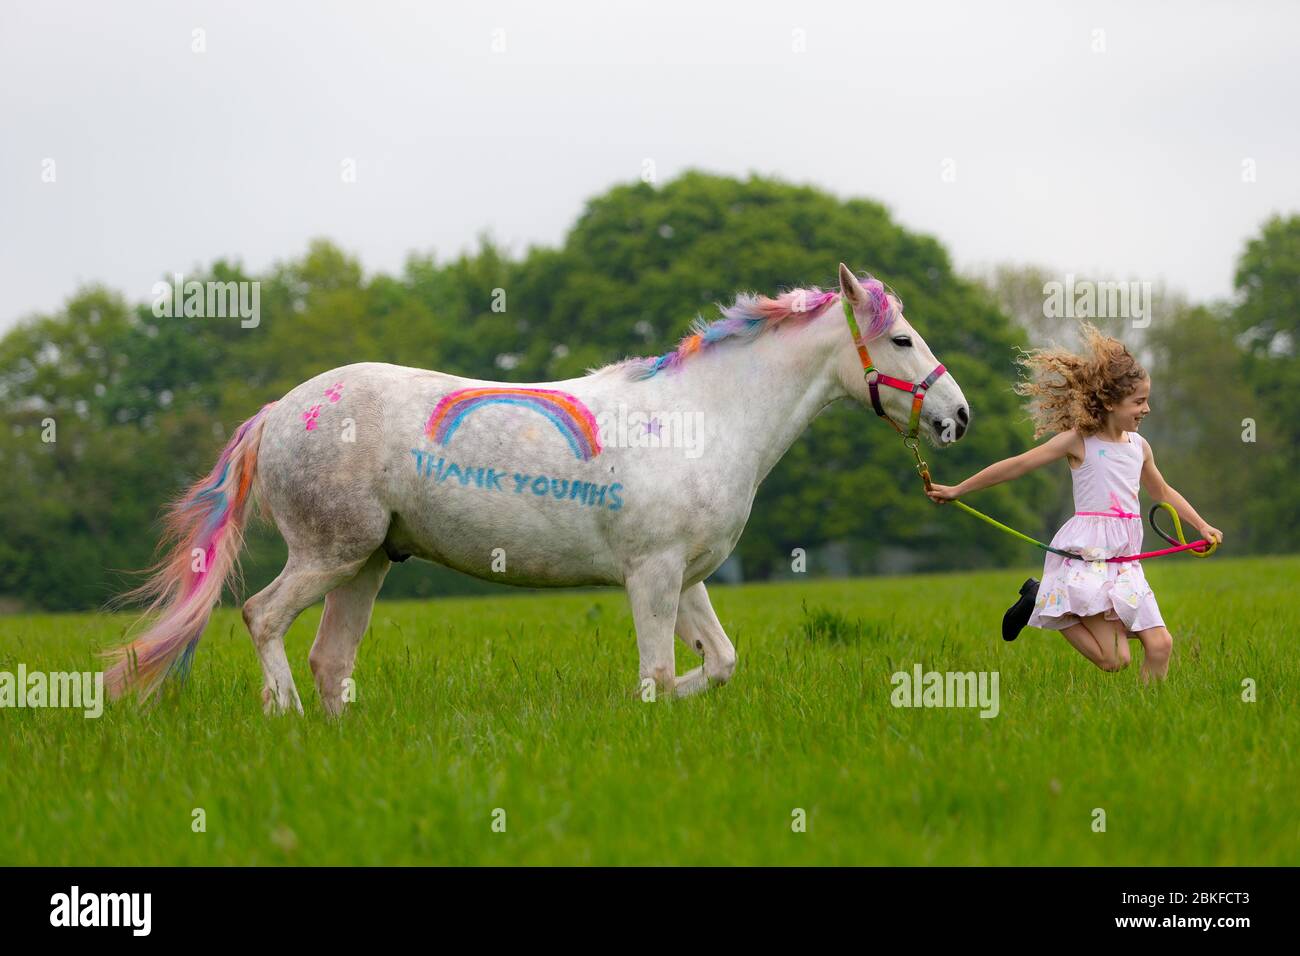 Bridgnorth, Shropshire, UK. 4th May, 2020. 8-year-old Amber Price, of Bridgnorth, with her New Forest Pony, Bear. Bear has been painted with a 'thank you' to the NHS using special pony paint. Credit: Peter Lopeman/Alamy Live News Stock Photo